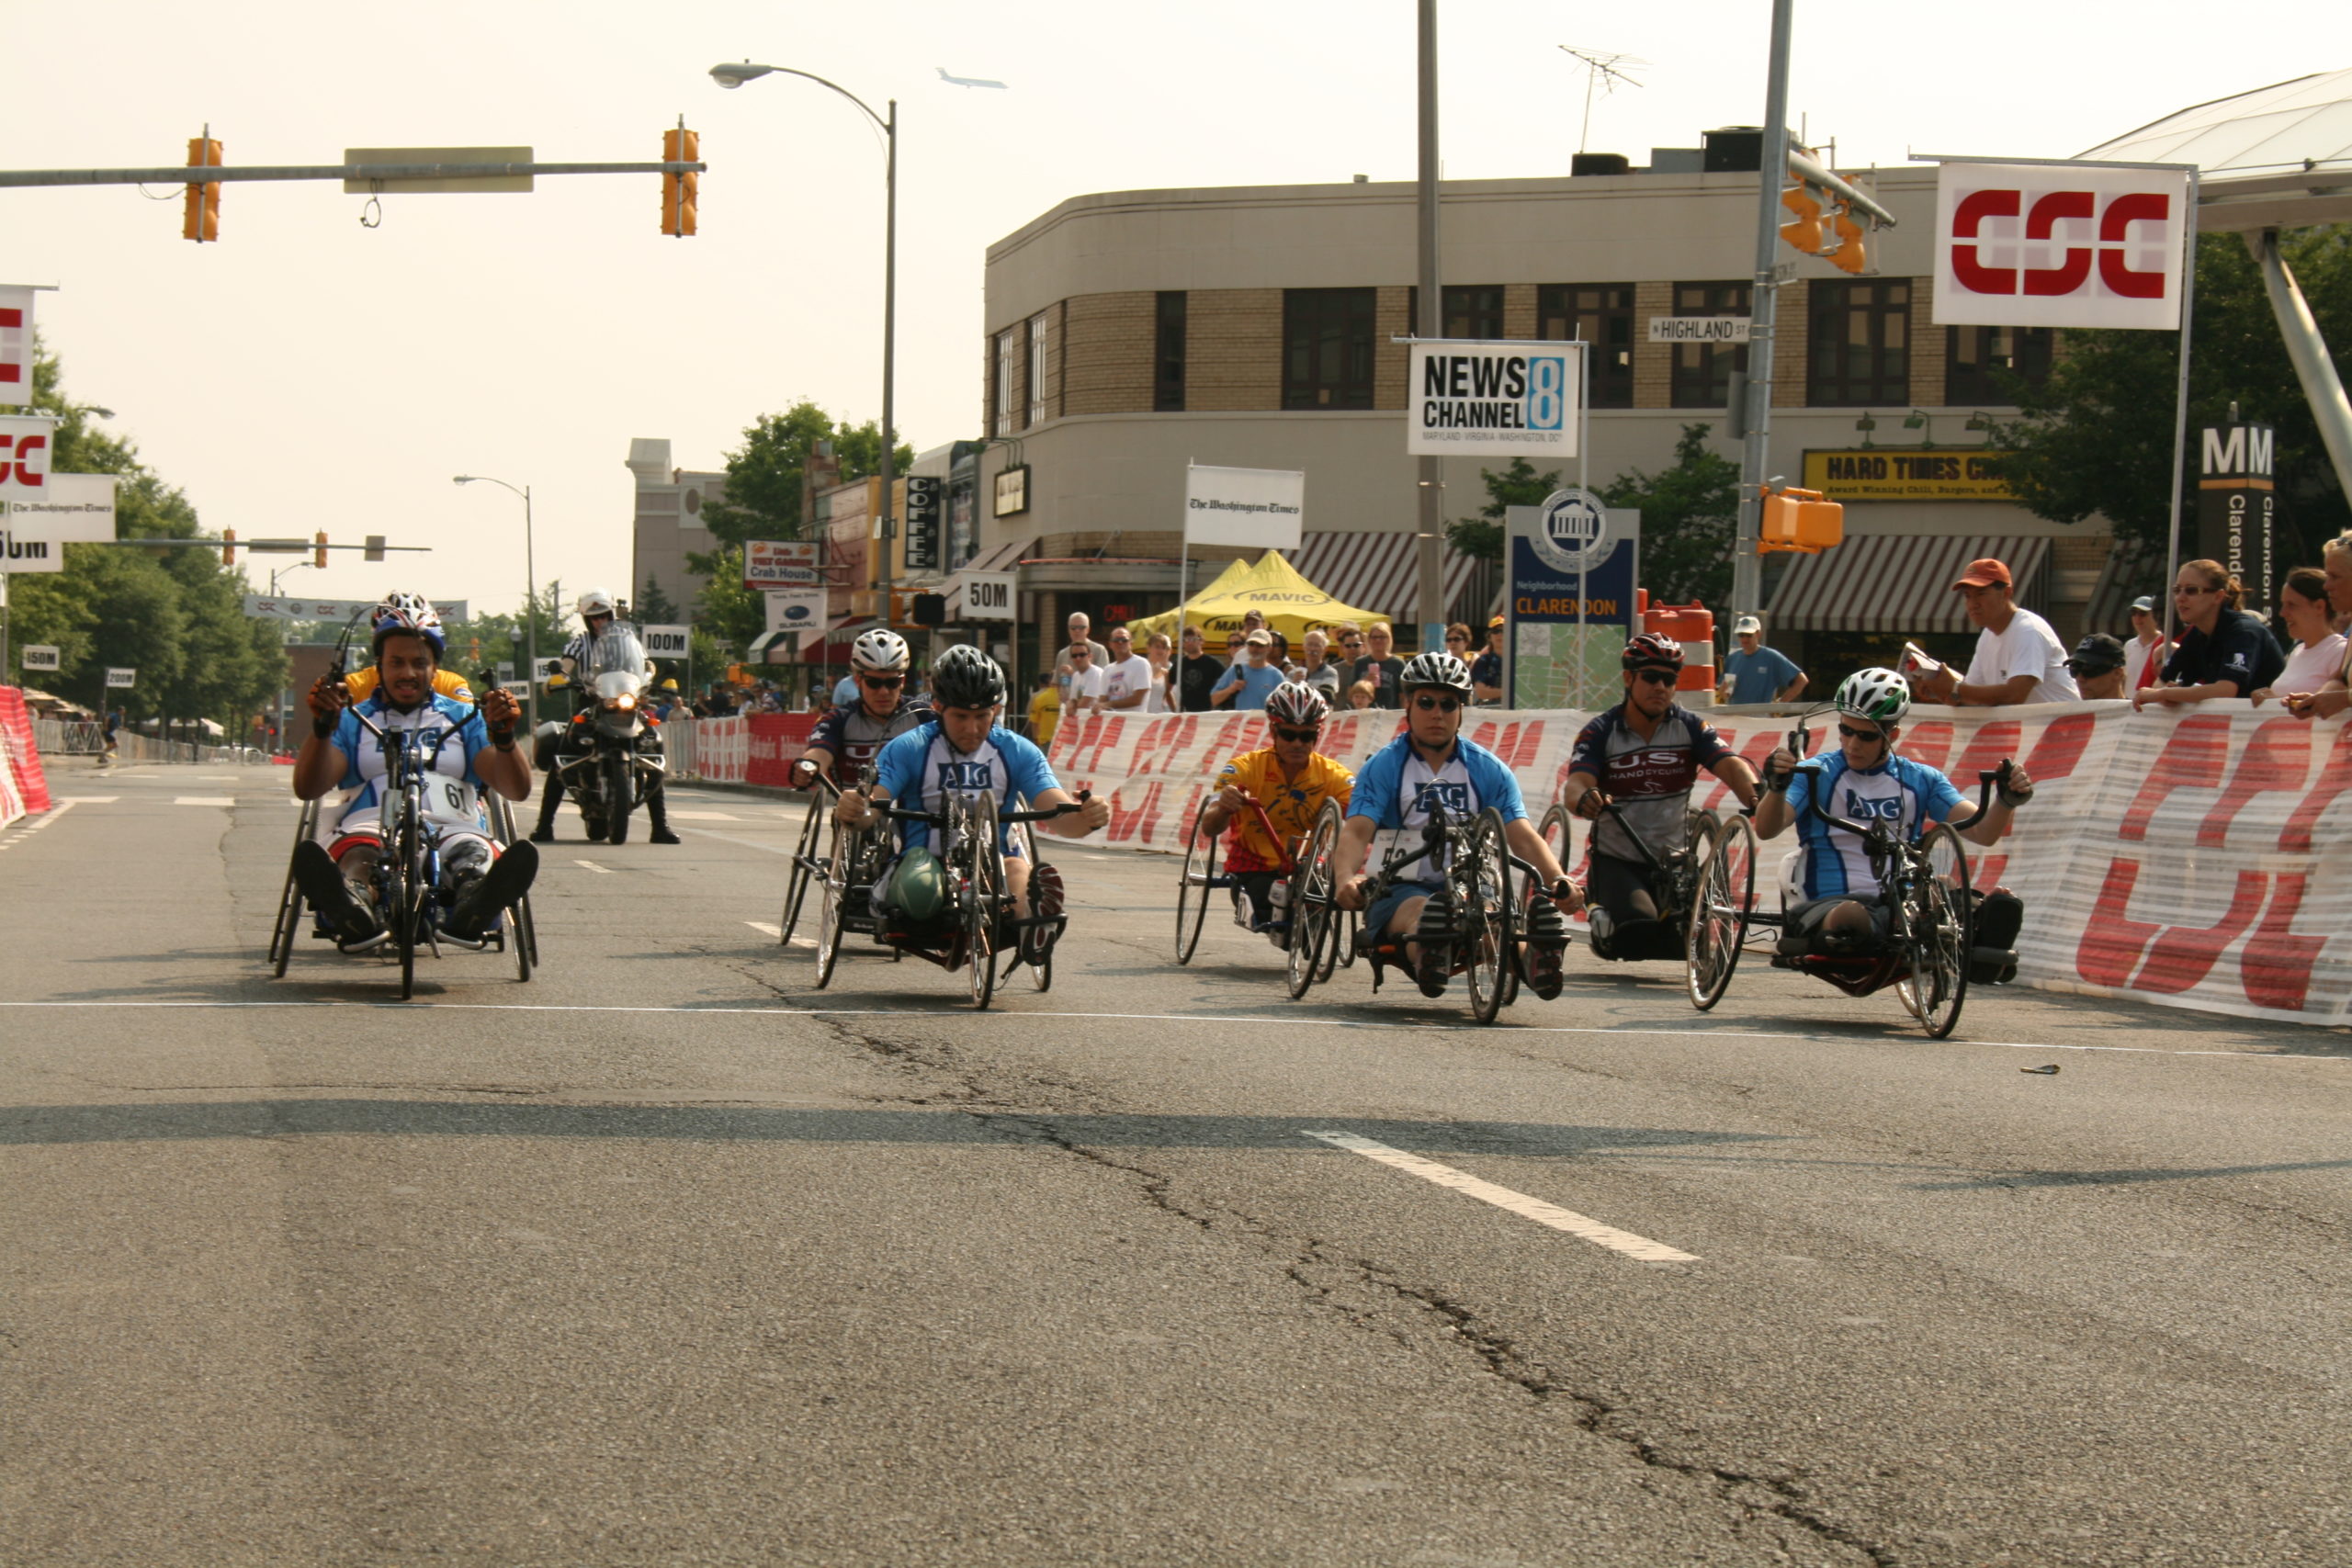 Group of athletes competing in hand cycling against each other on a street with onlookers to their left